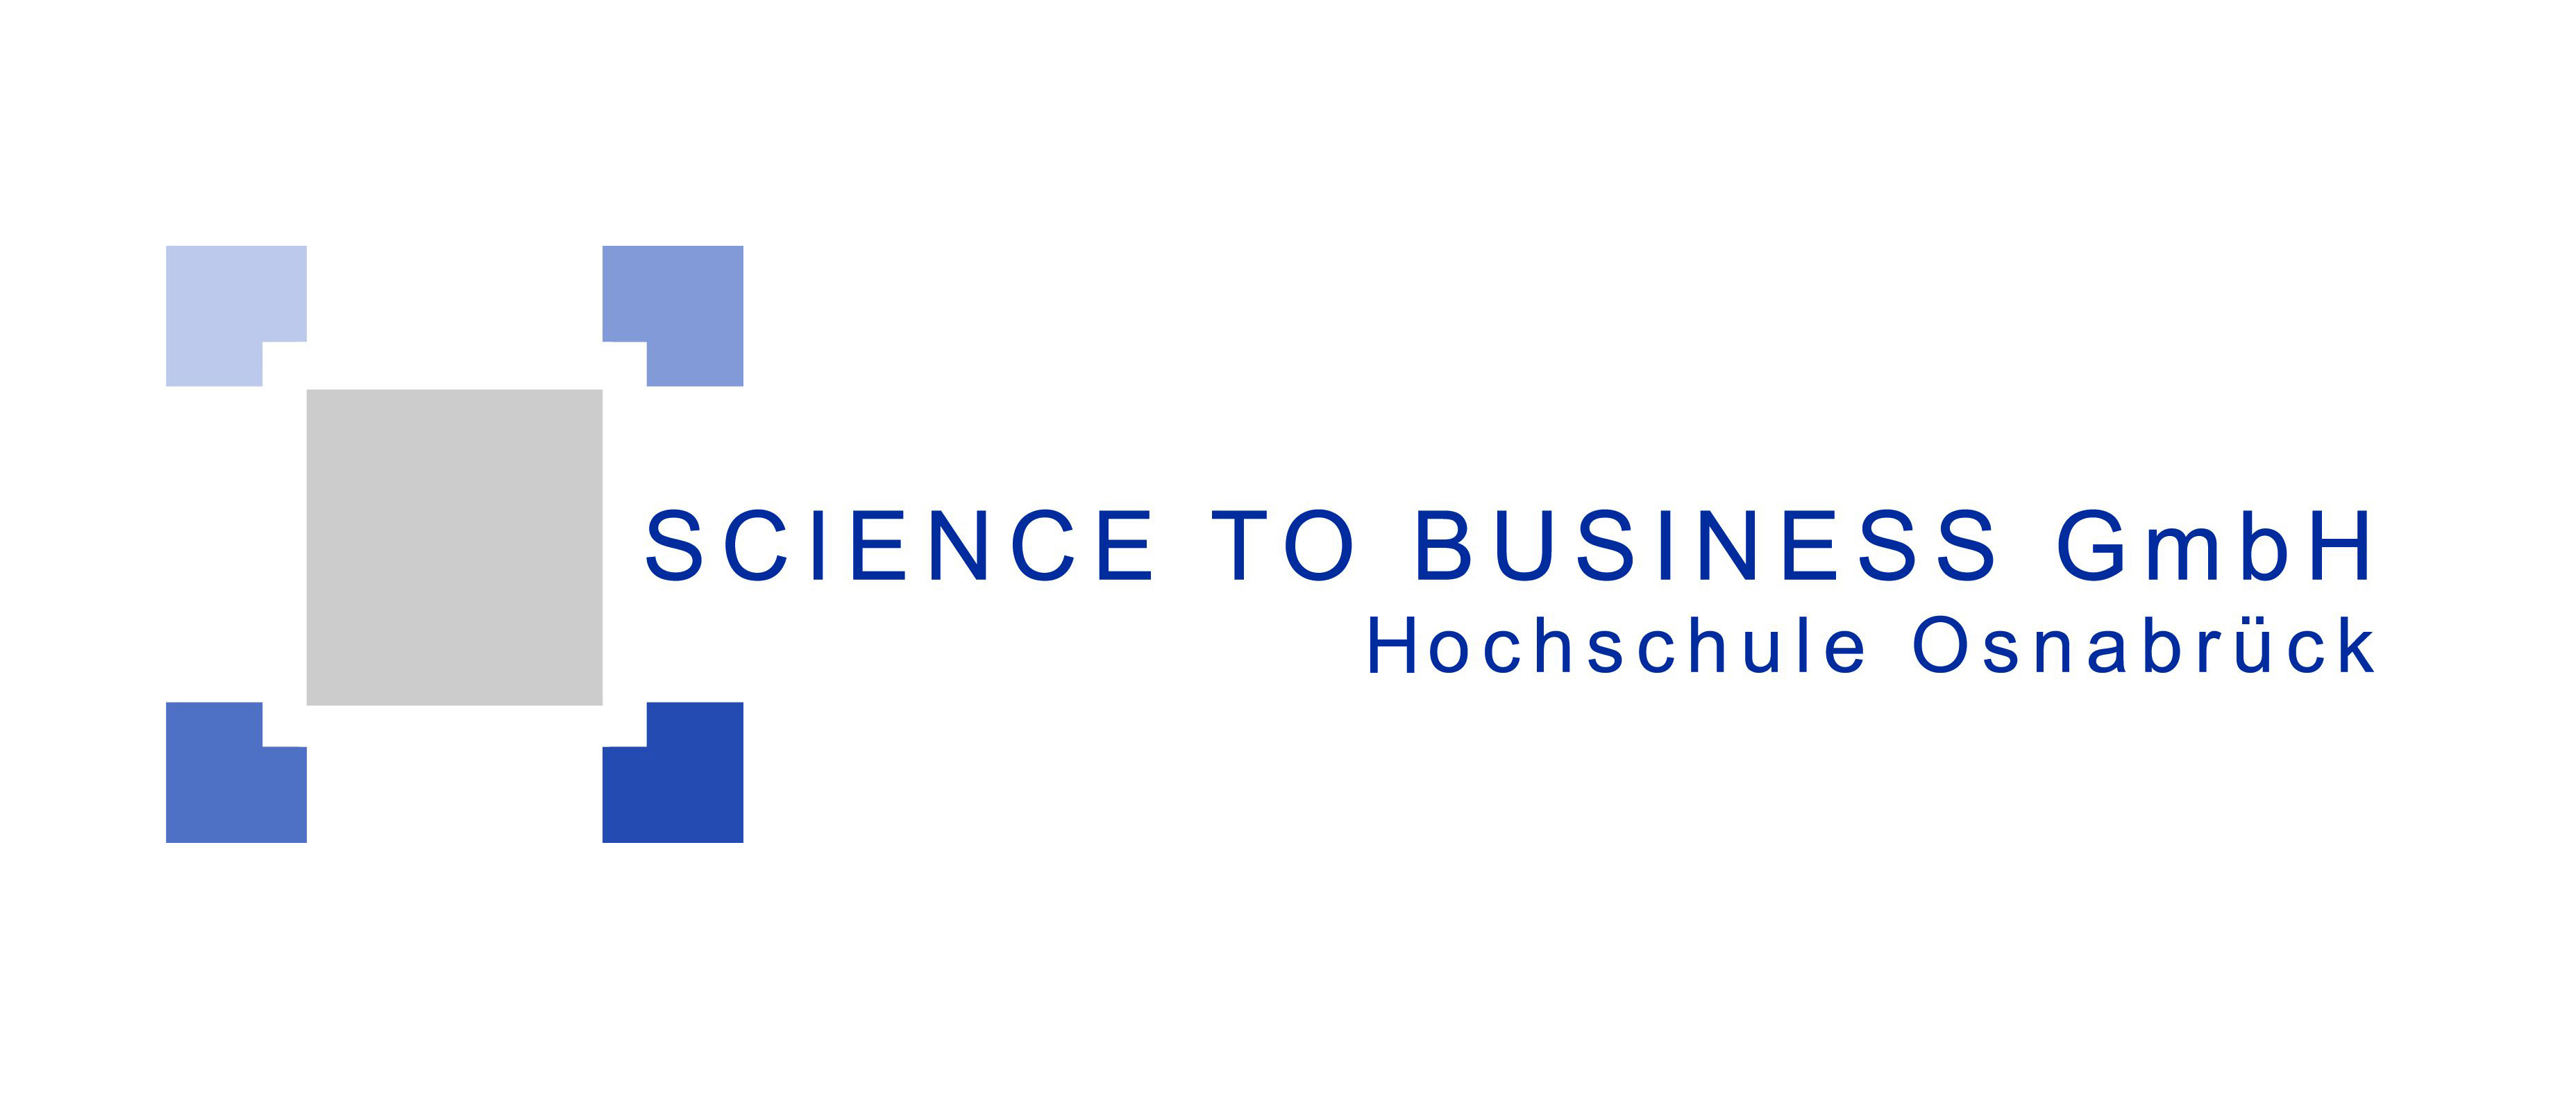 Science to Business GmbH